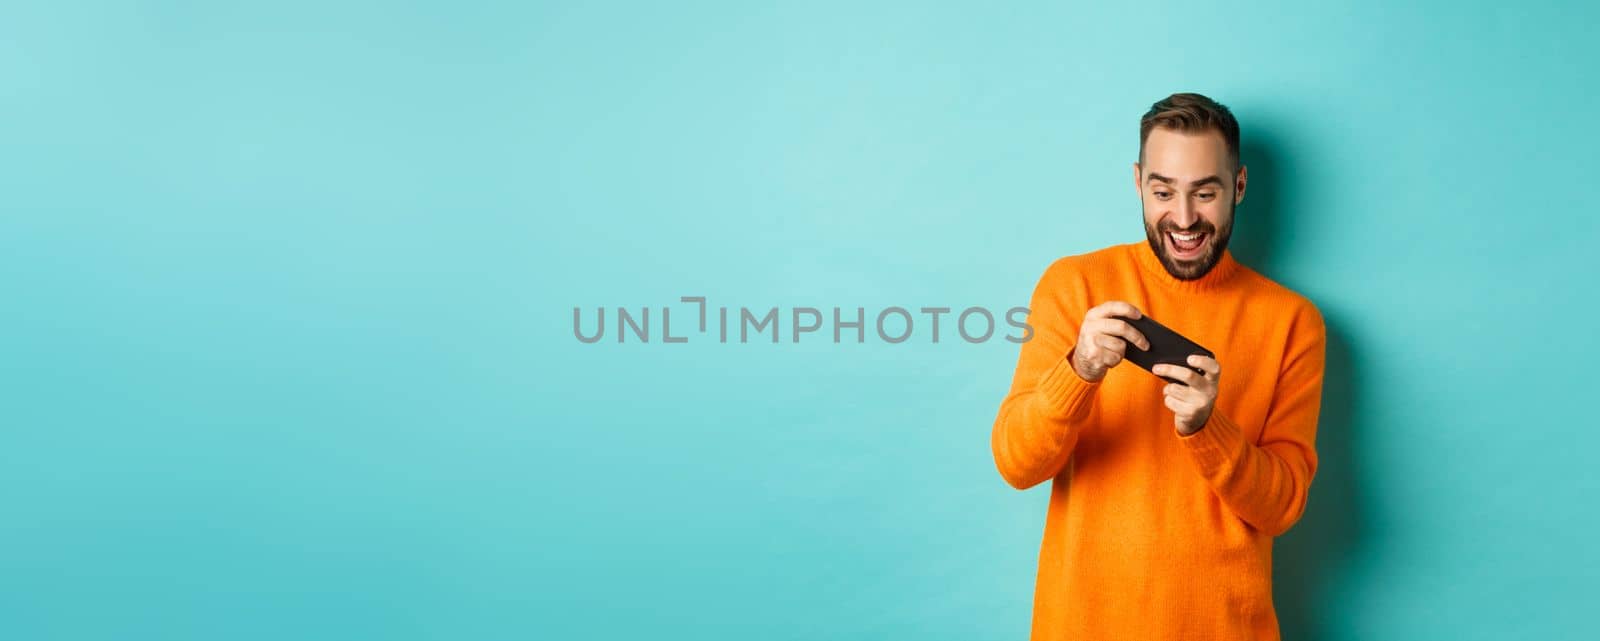 Excited adult man playing on mobile phone, looking amazed at smartphone screen, standing over turquoise background.